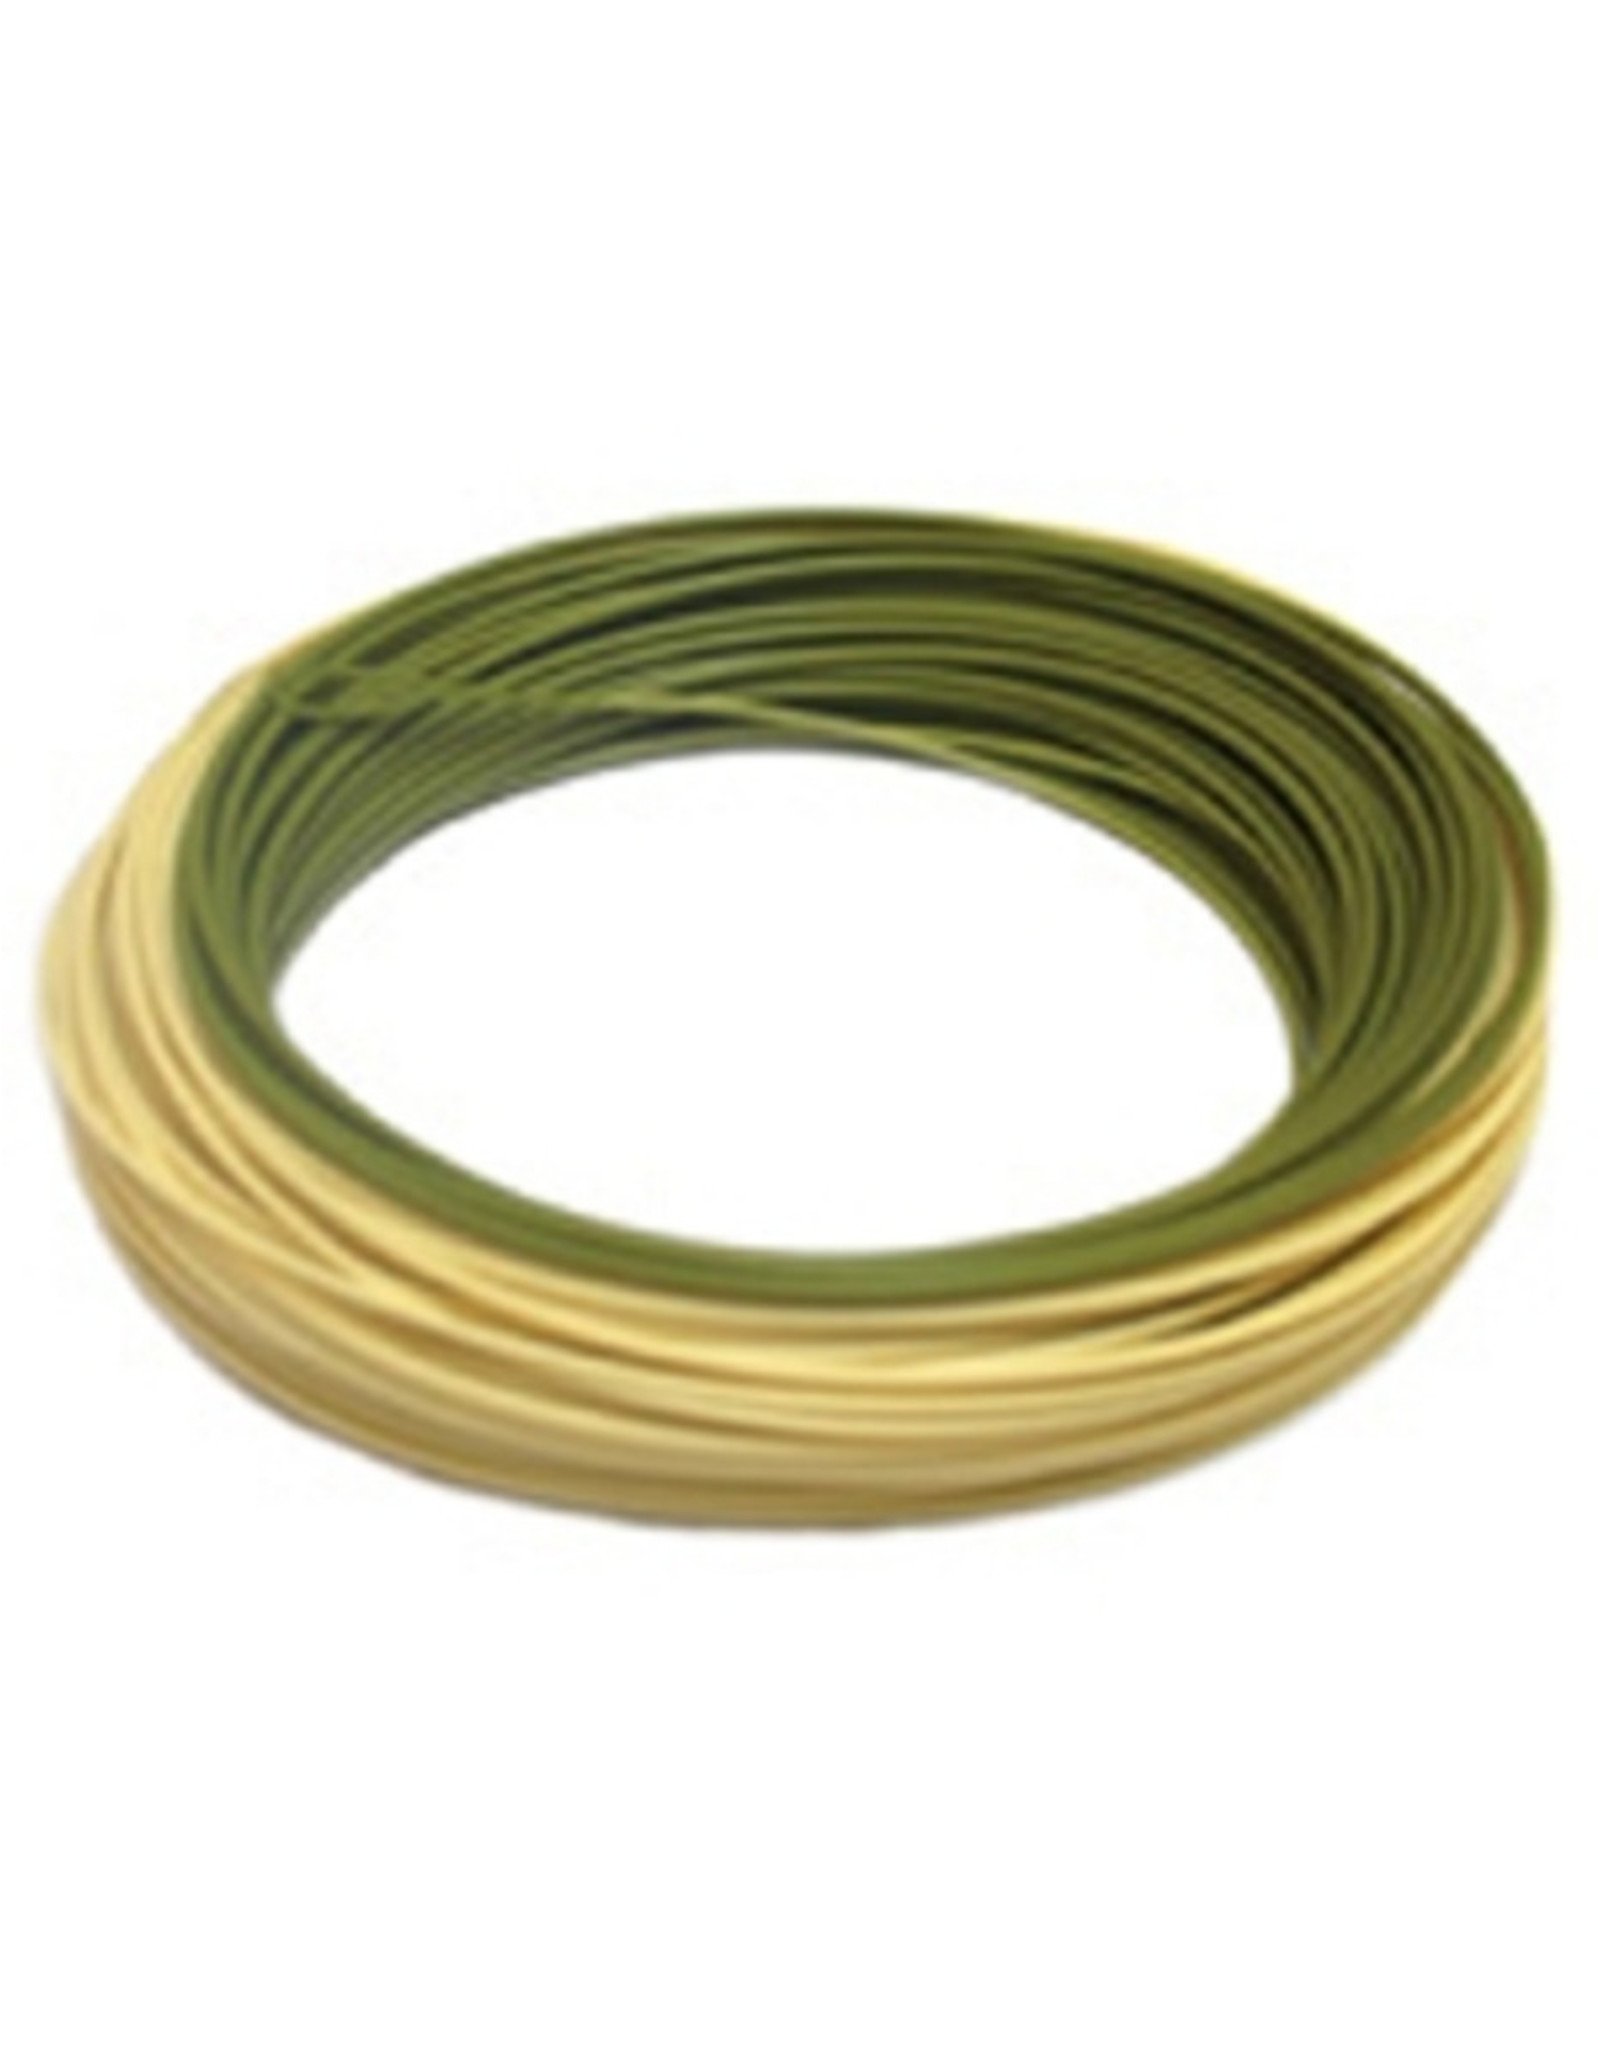 Rio Products Rio - Trout LT Fly Line